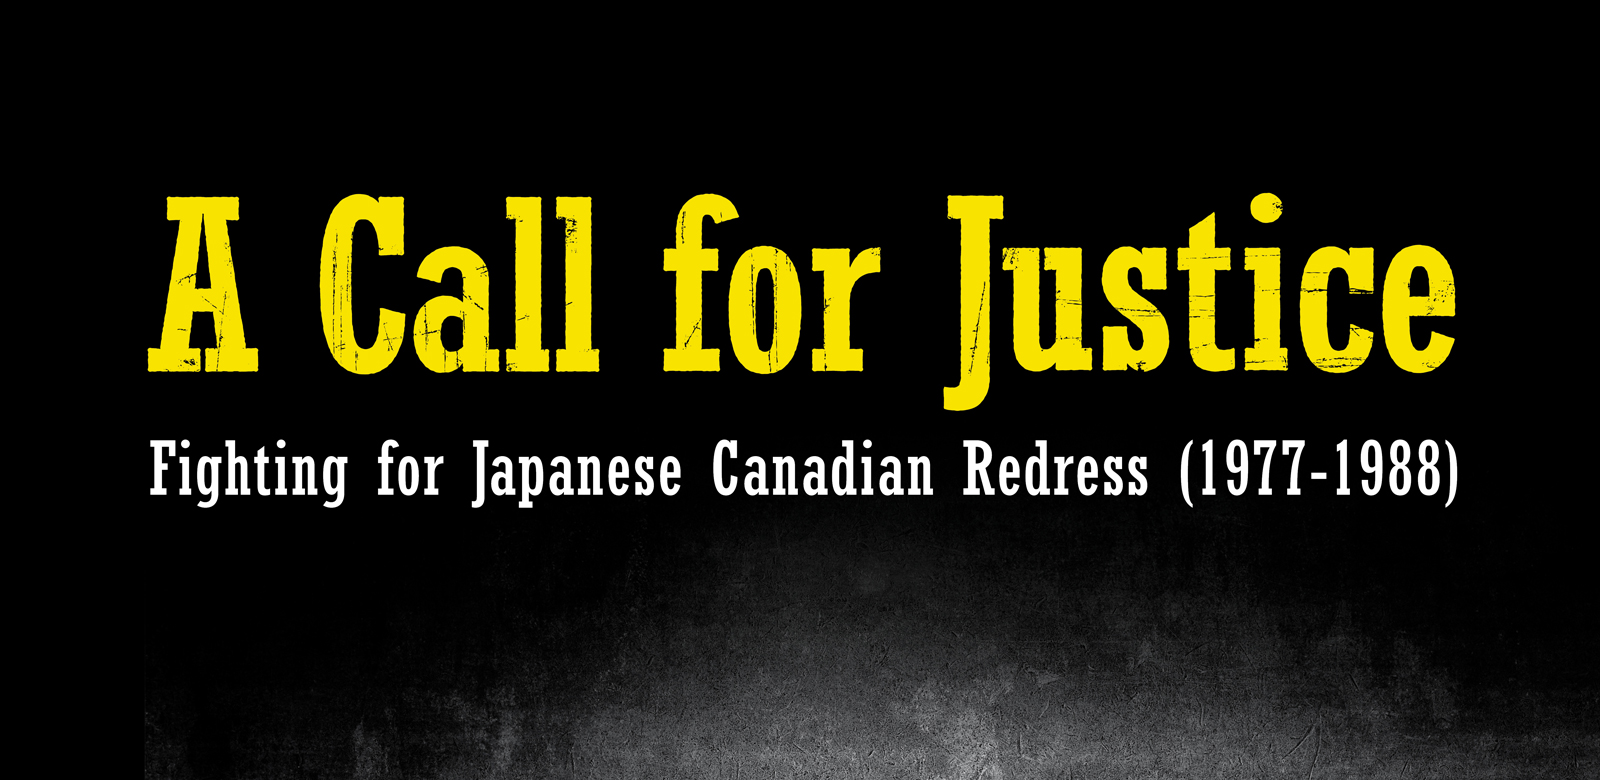 January 15 to April 2, 2018 - A Call for Justice: Fighting for Japanese Canadian Redress (1977-1988)